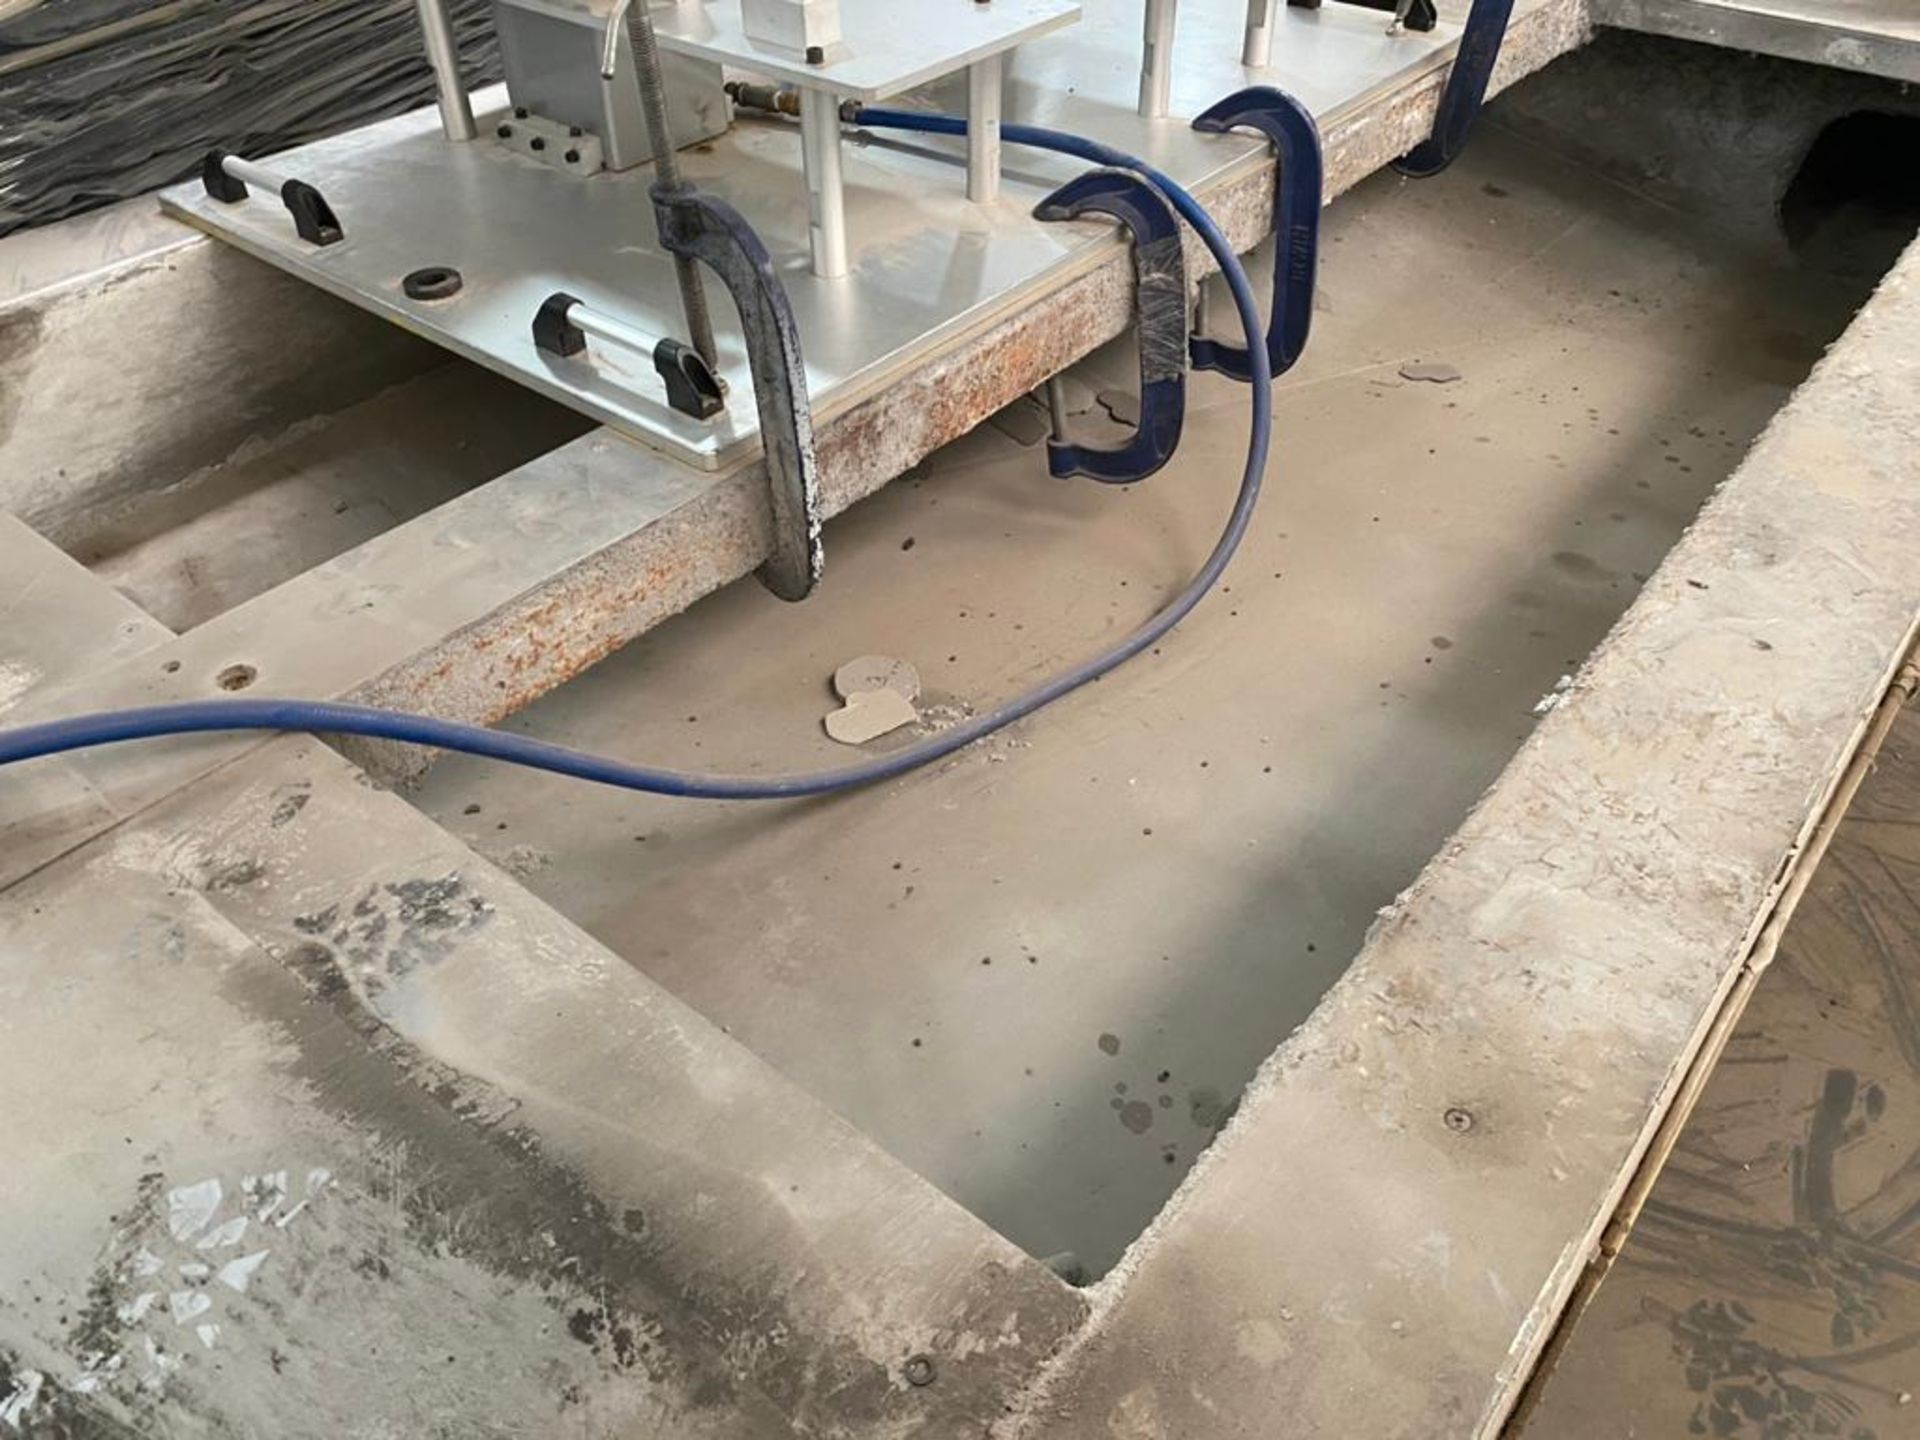 2012 H2O JET Waterjet Cutting Systems, Model 303002-1-EE-4S-102 - Image 19 of 48